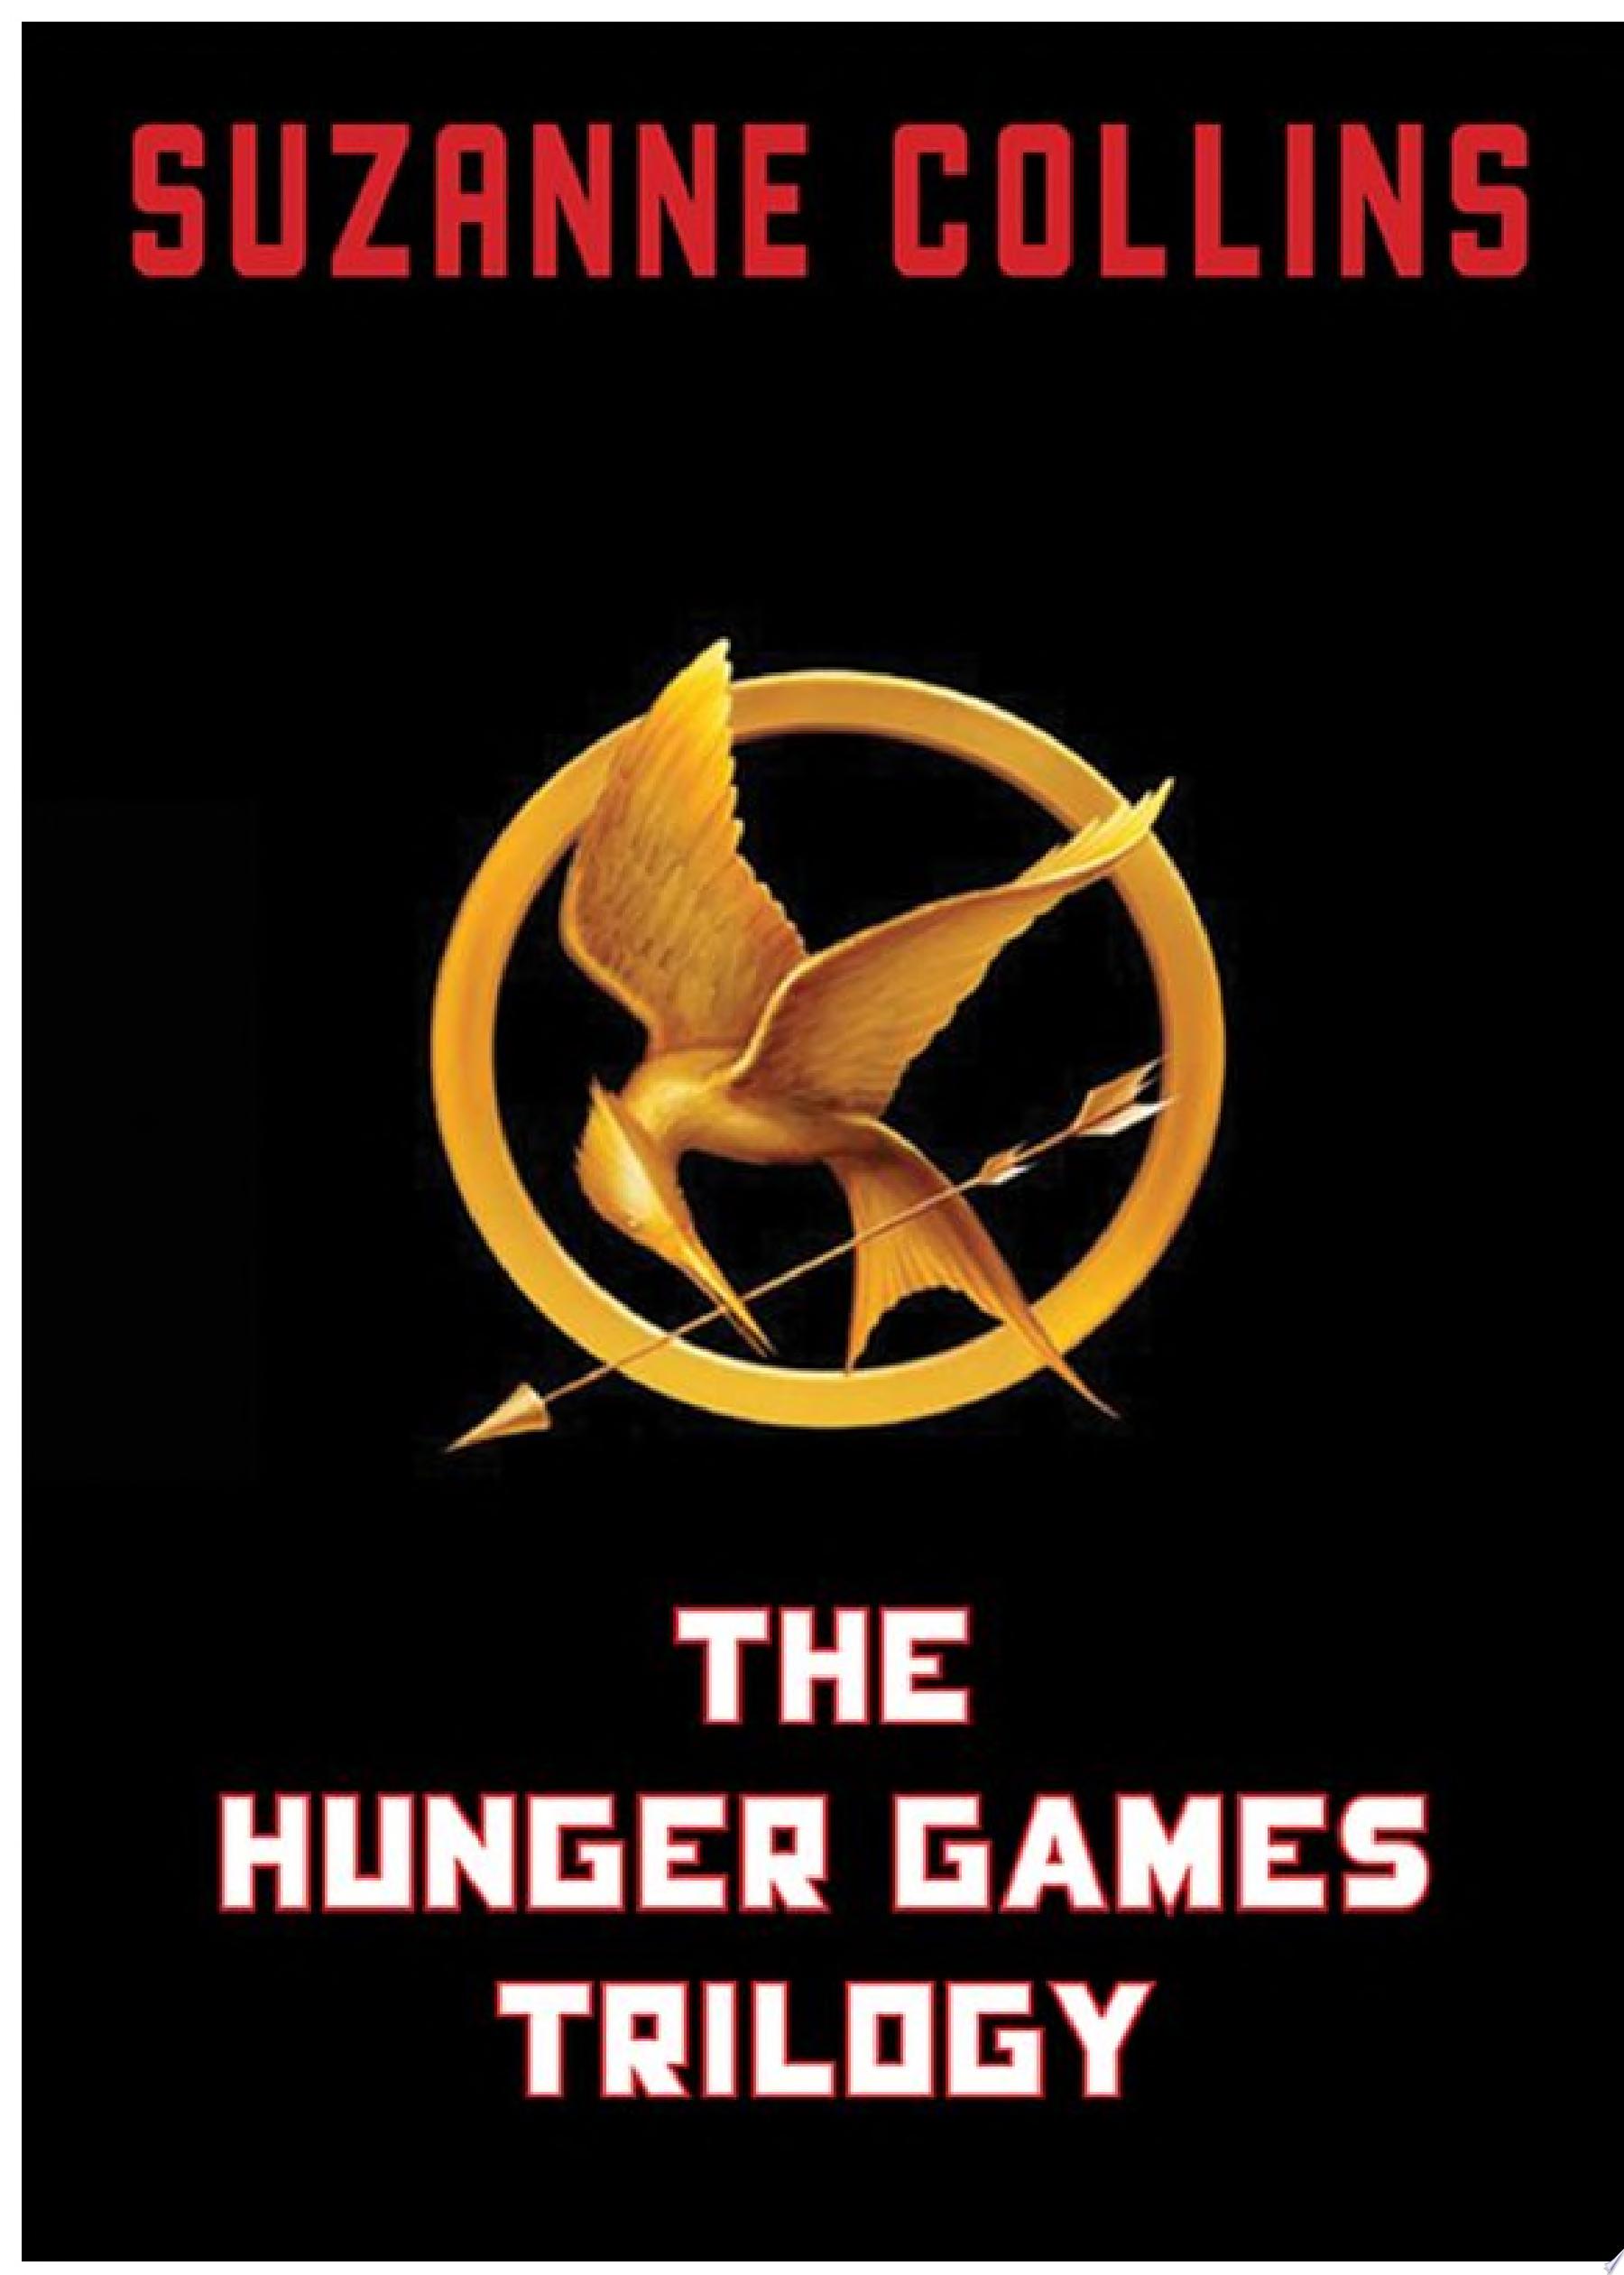 Image for "The Hunger Games Trilogy"